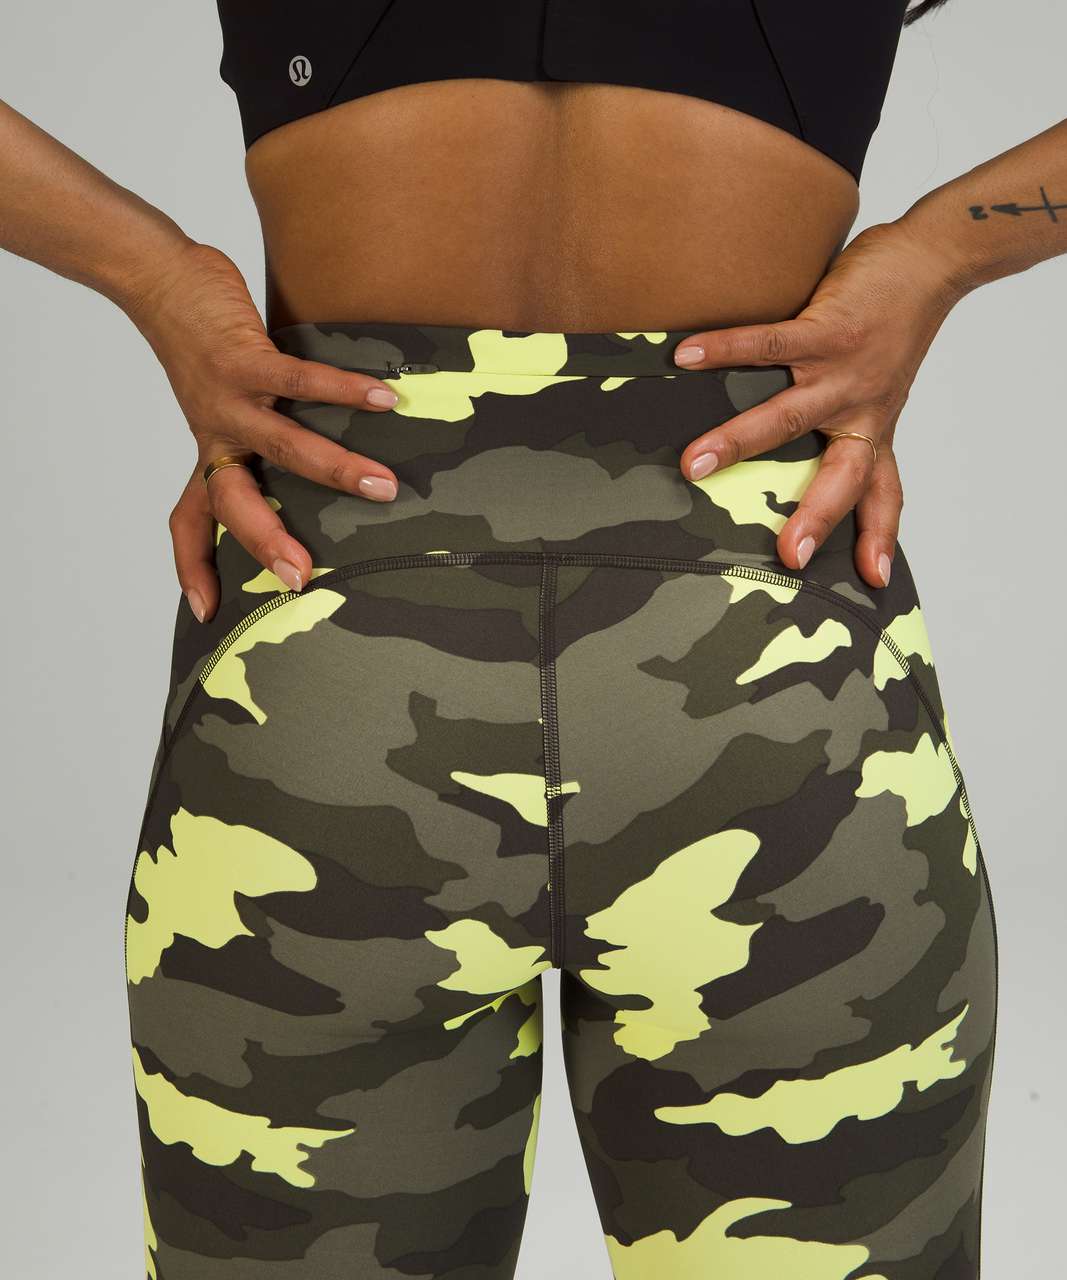 Lululemon Fast and Free Tight 25 Non-Reflective Heritage 365 Camo Green  Size 10 for Sale in Peoria, AZ - OfferUp